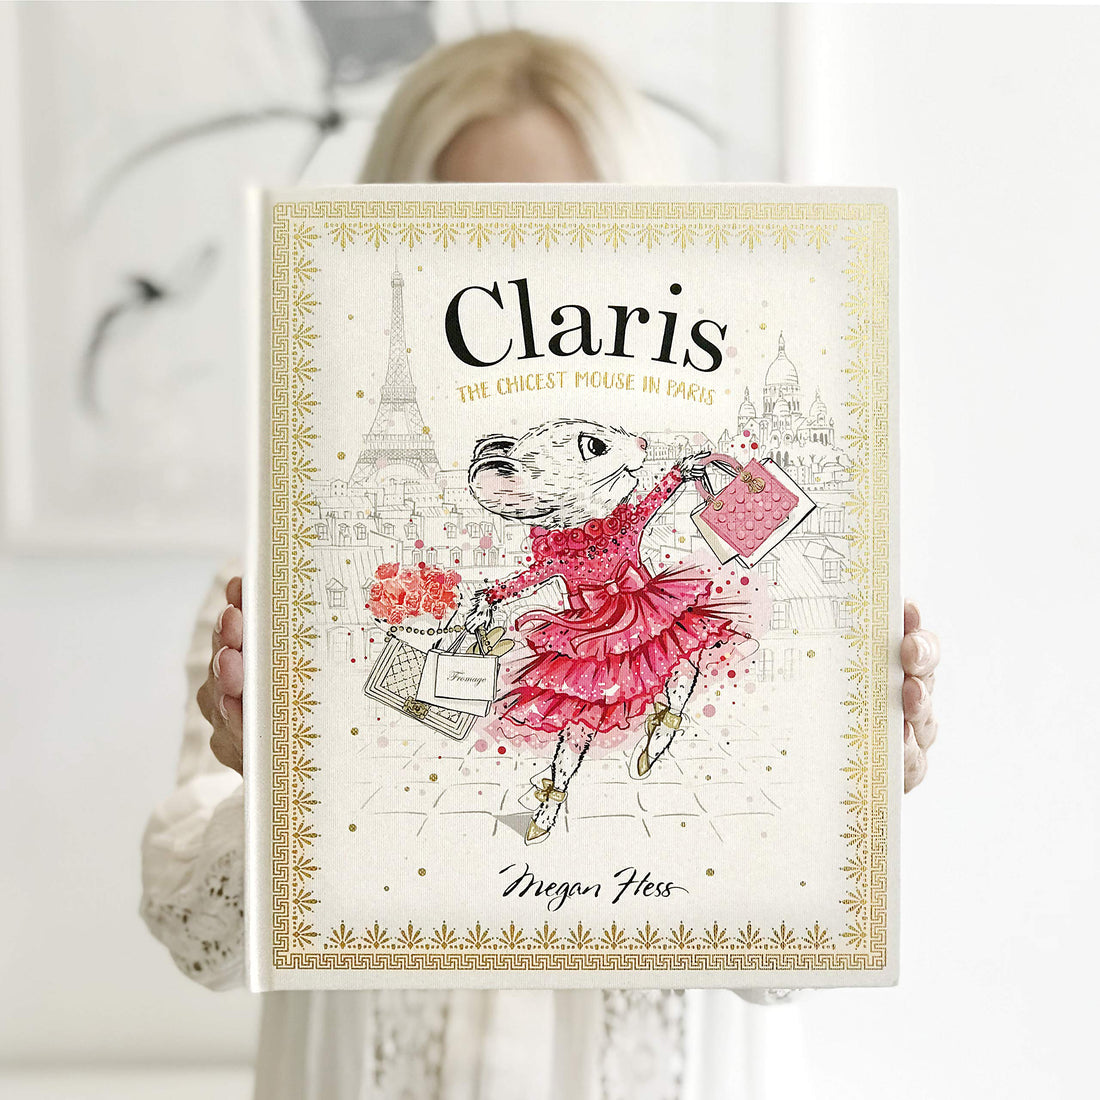 book-claris-the-chicest-mouse-in-paris- (6)